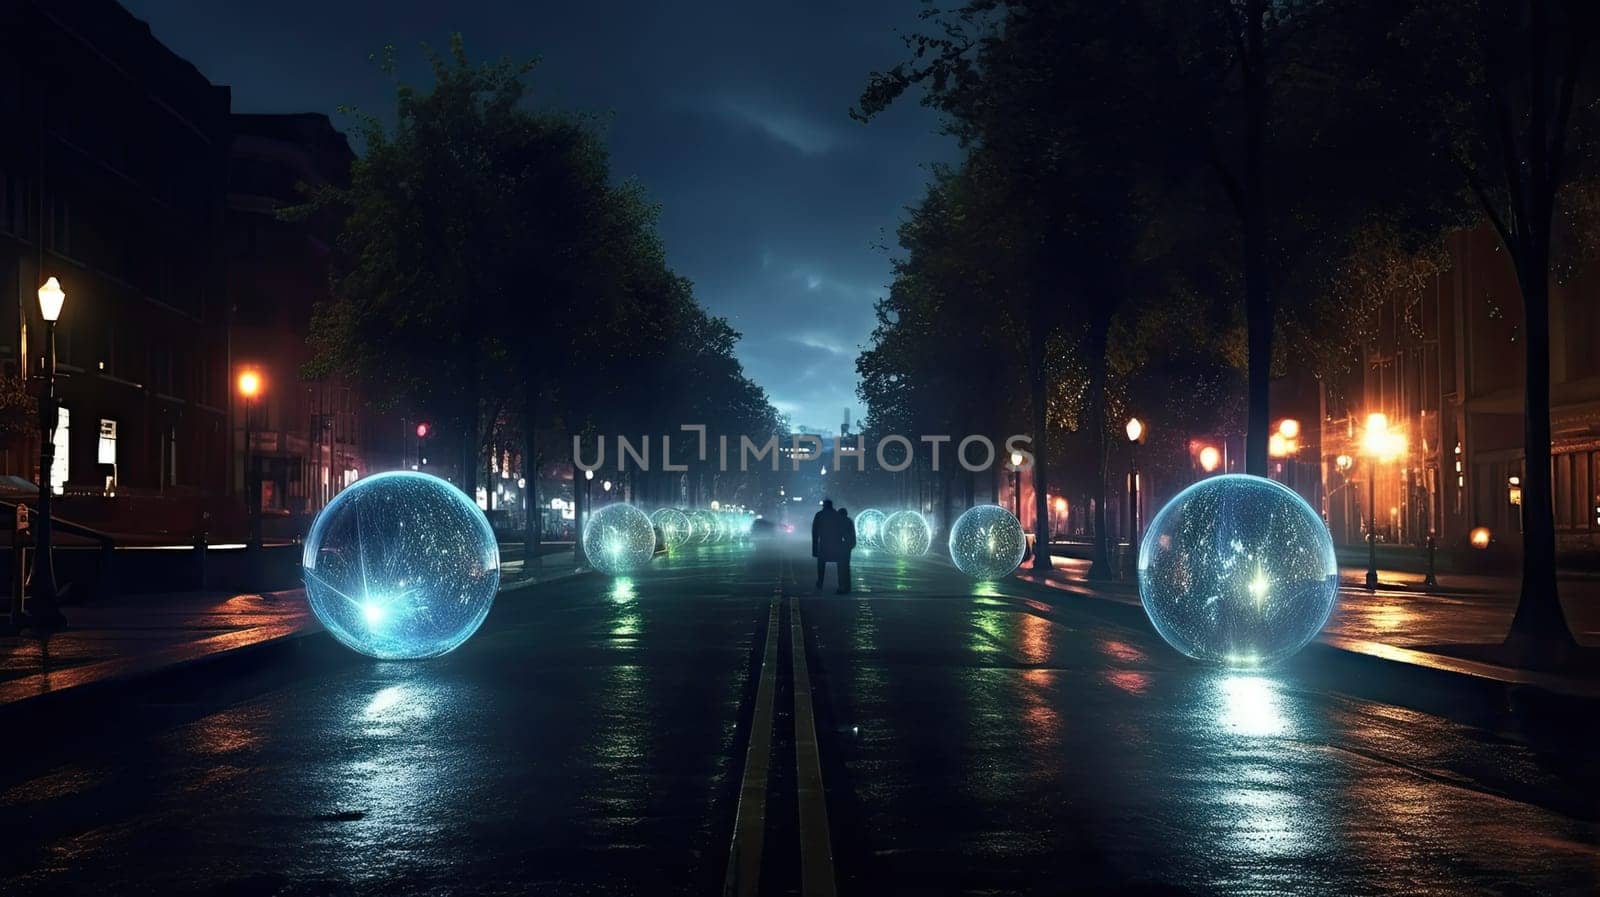 Luminiscent spheres float above the city streets photo realistic illustration - Generative AI. Street, people, building, sphere.